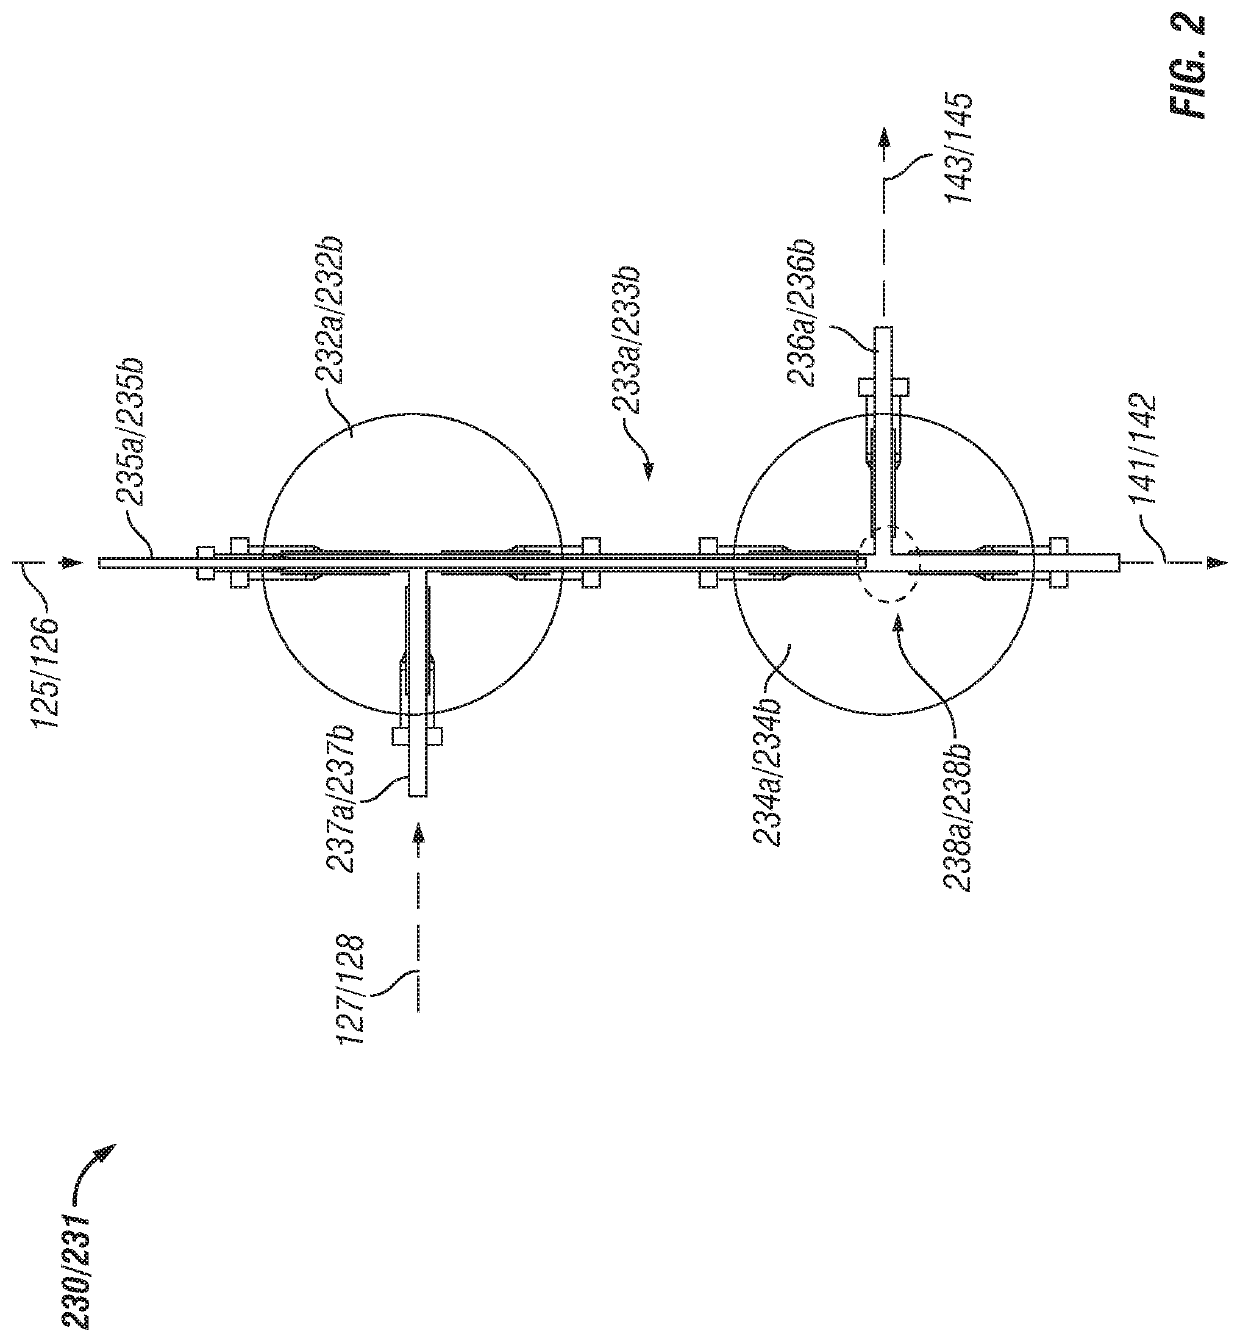 Method and apparatus for quantitatively analyzing a gaseous process stream